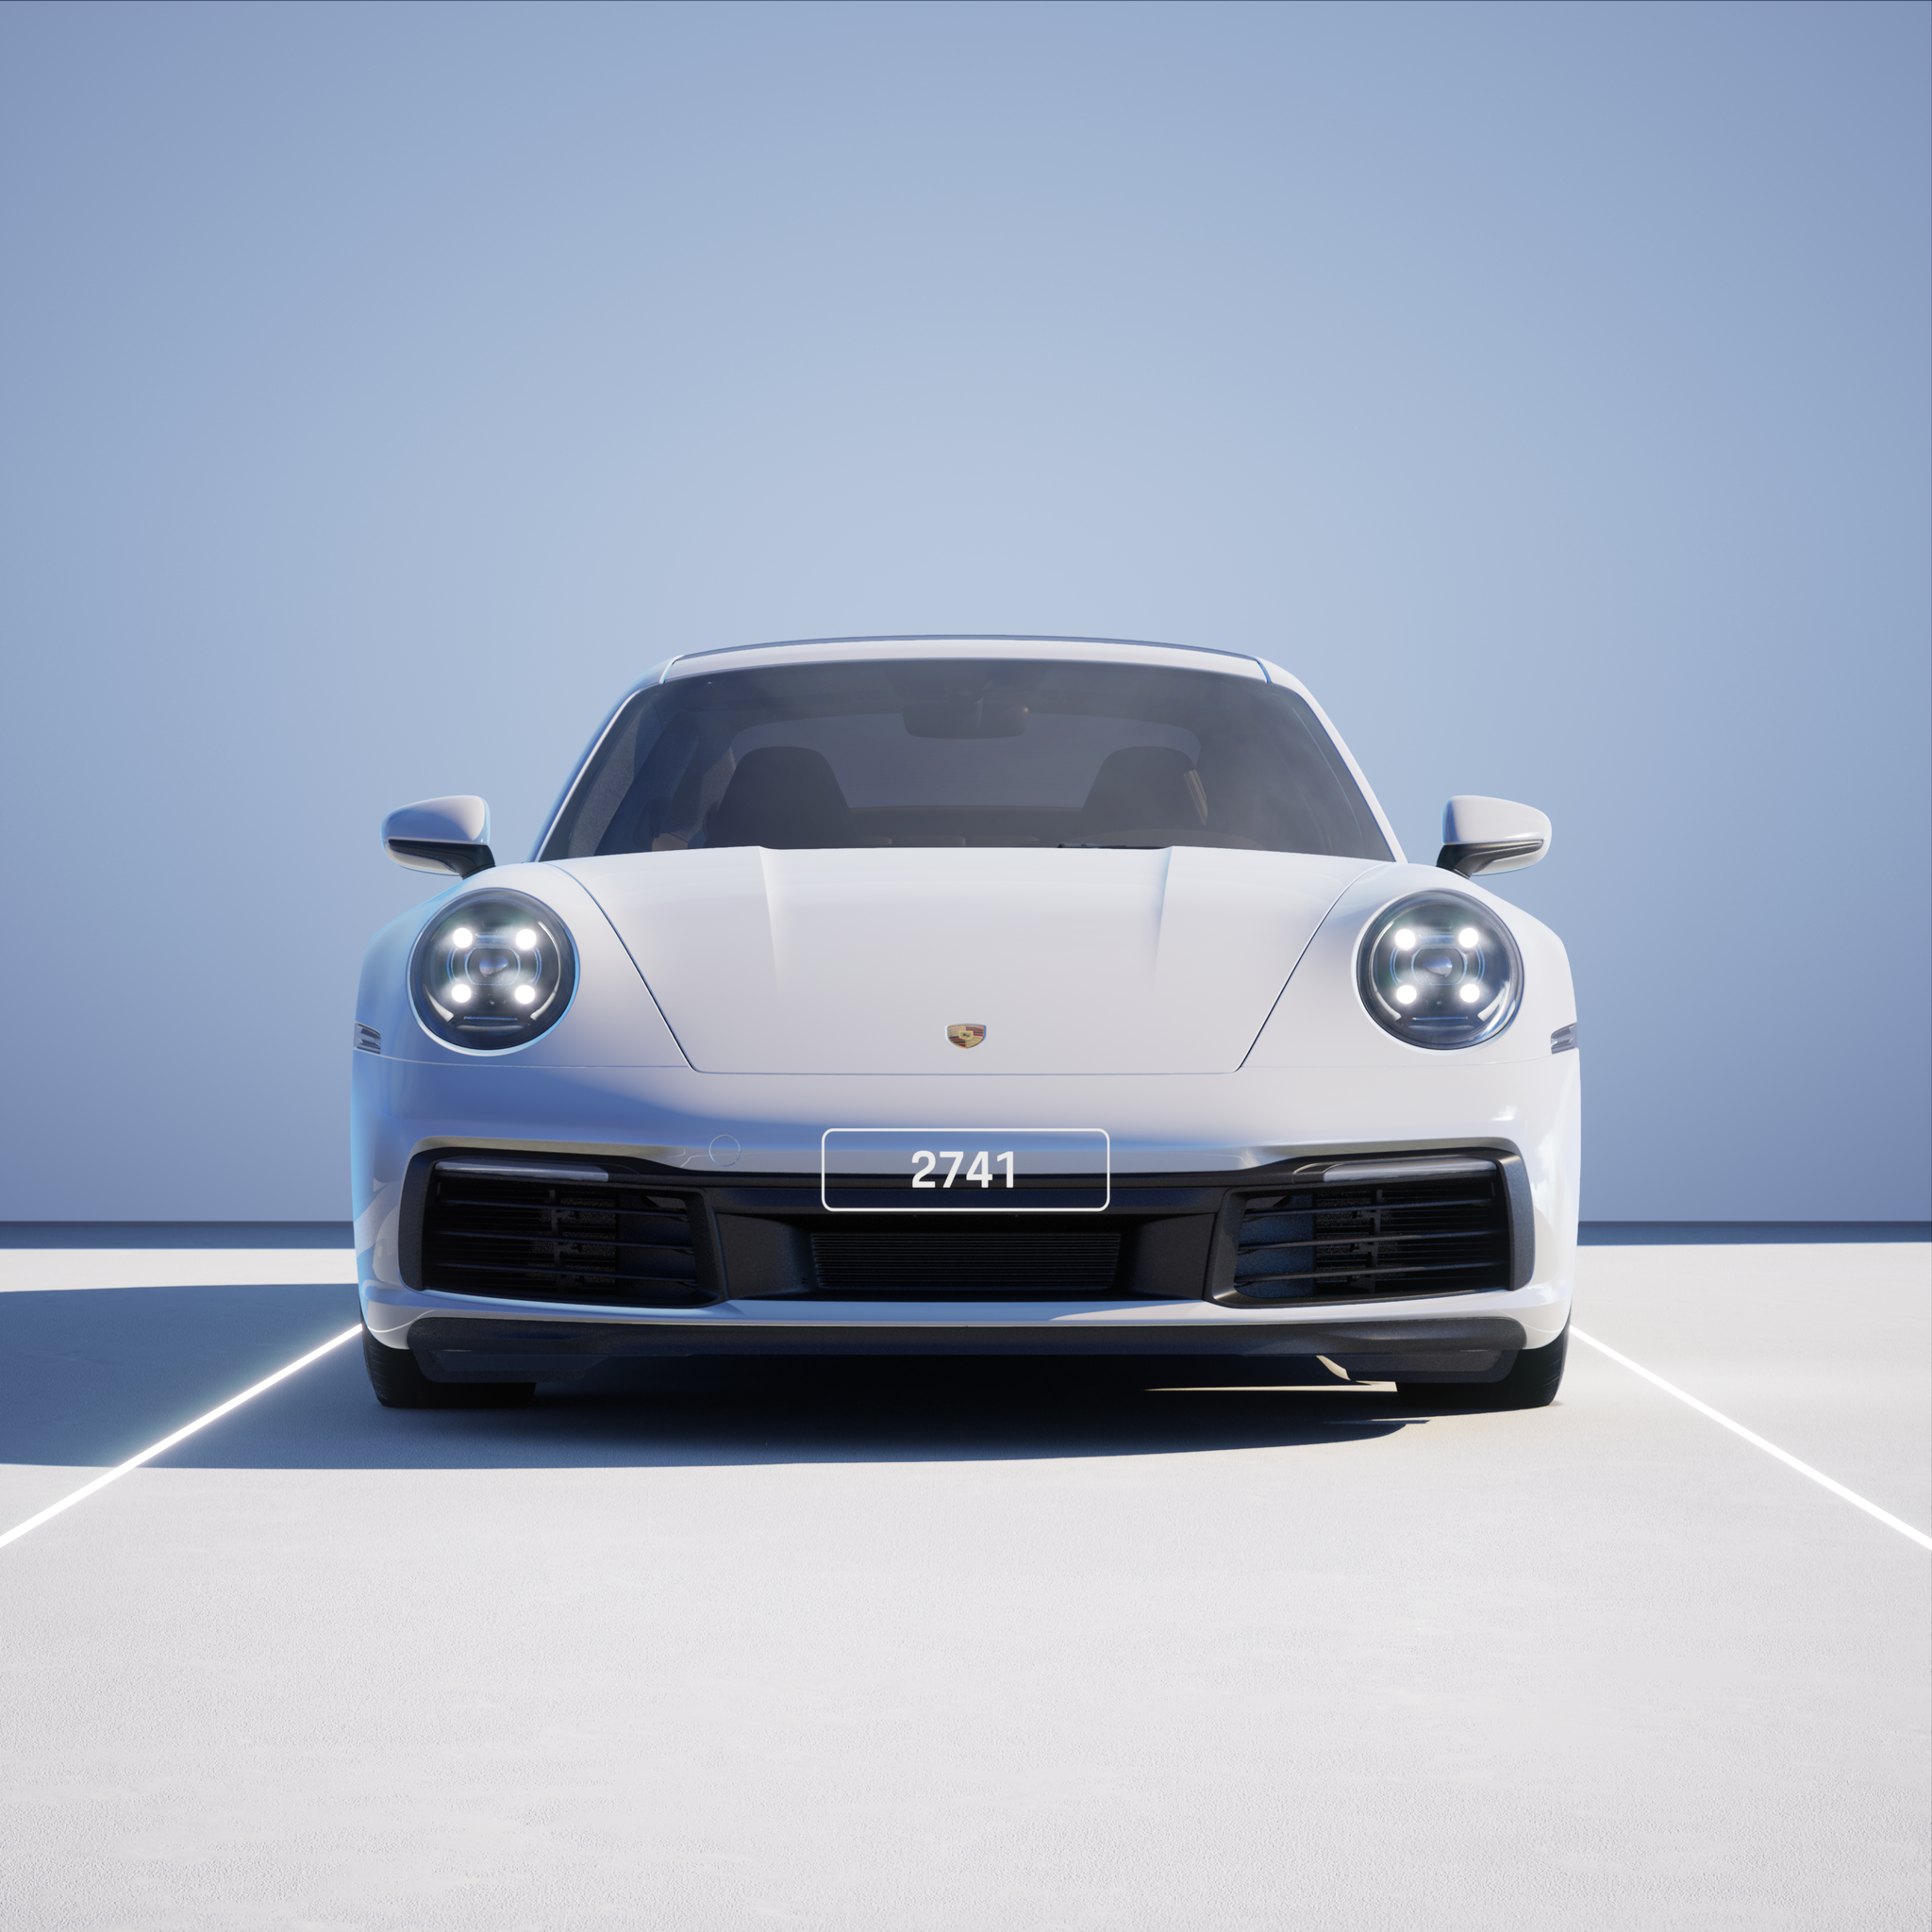 The PORSCHΞ 911 2741 image in phase